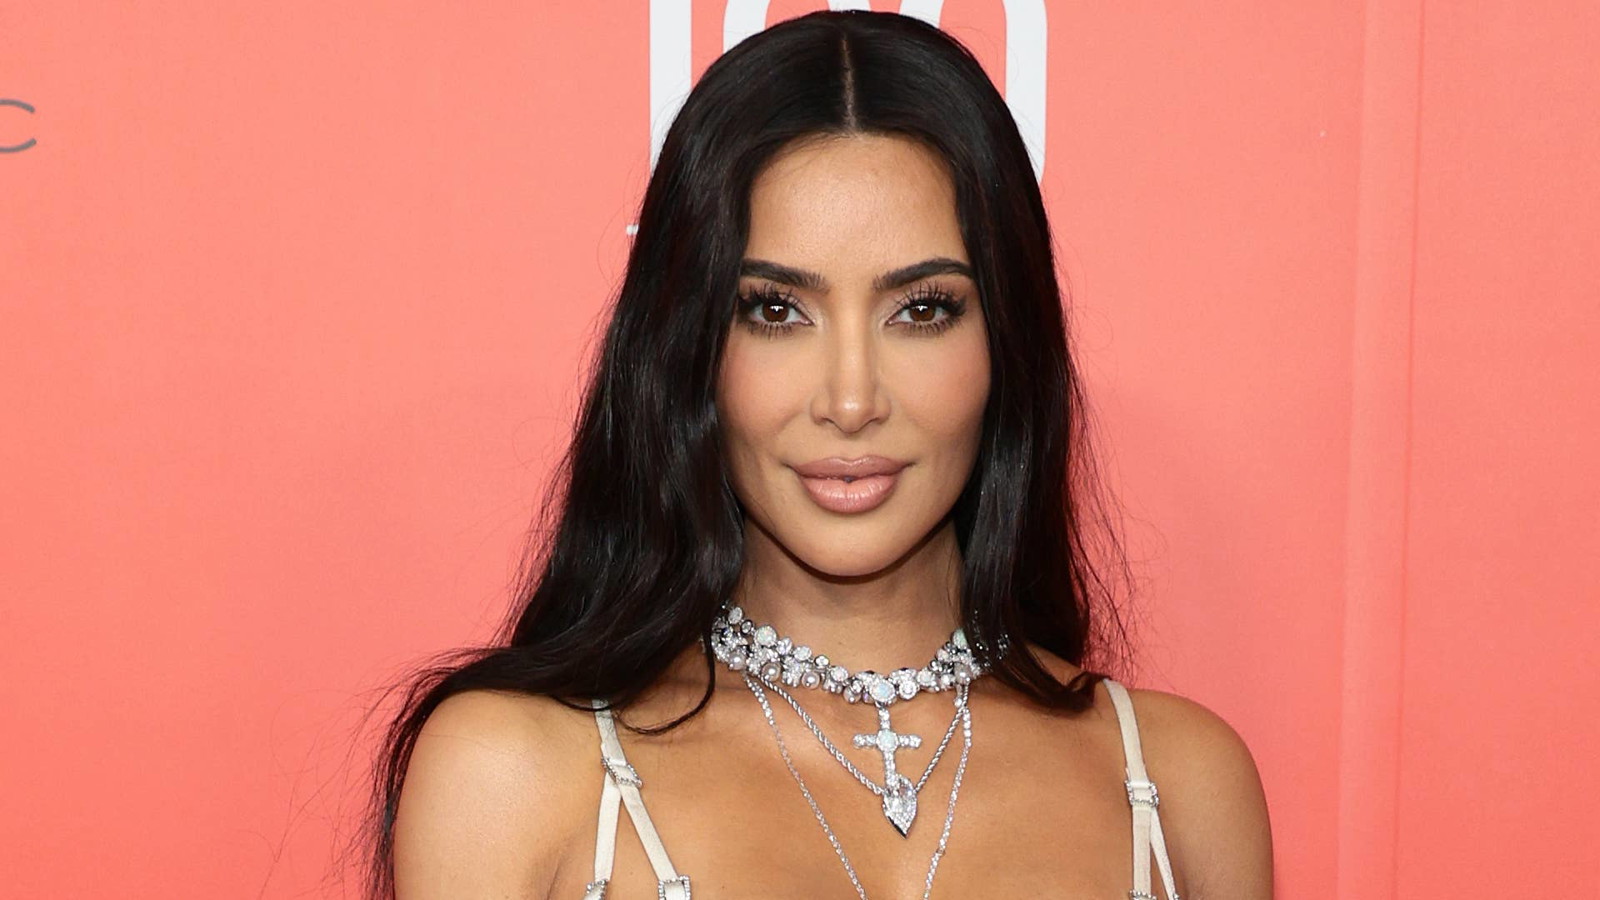 Dillon Danis is Obsessed with Kim Kardashian